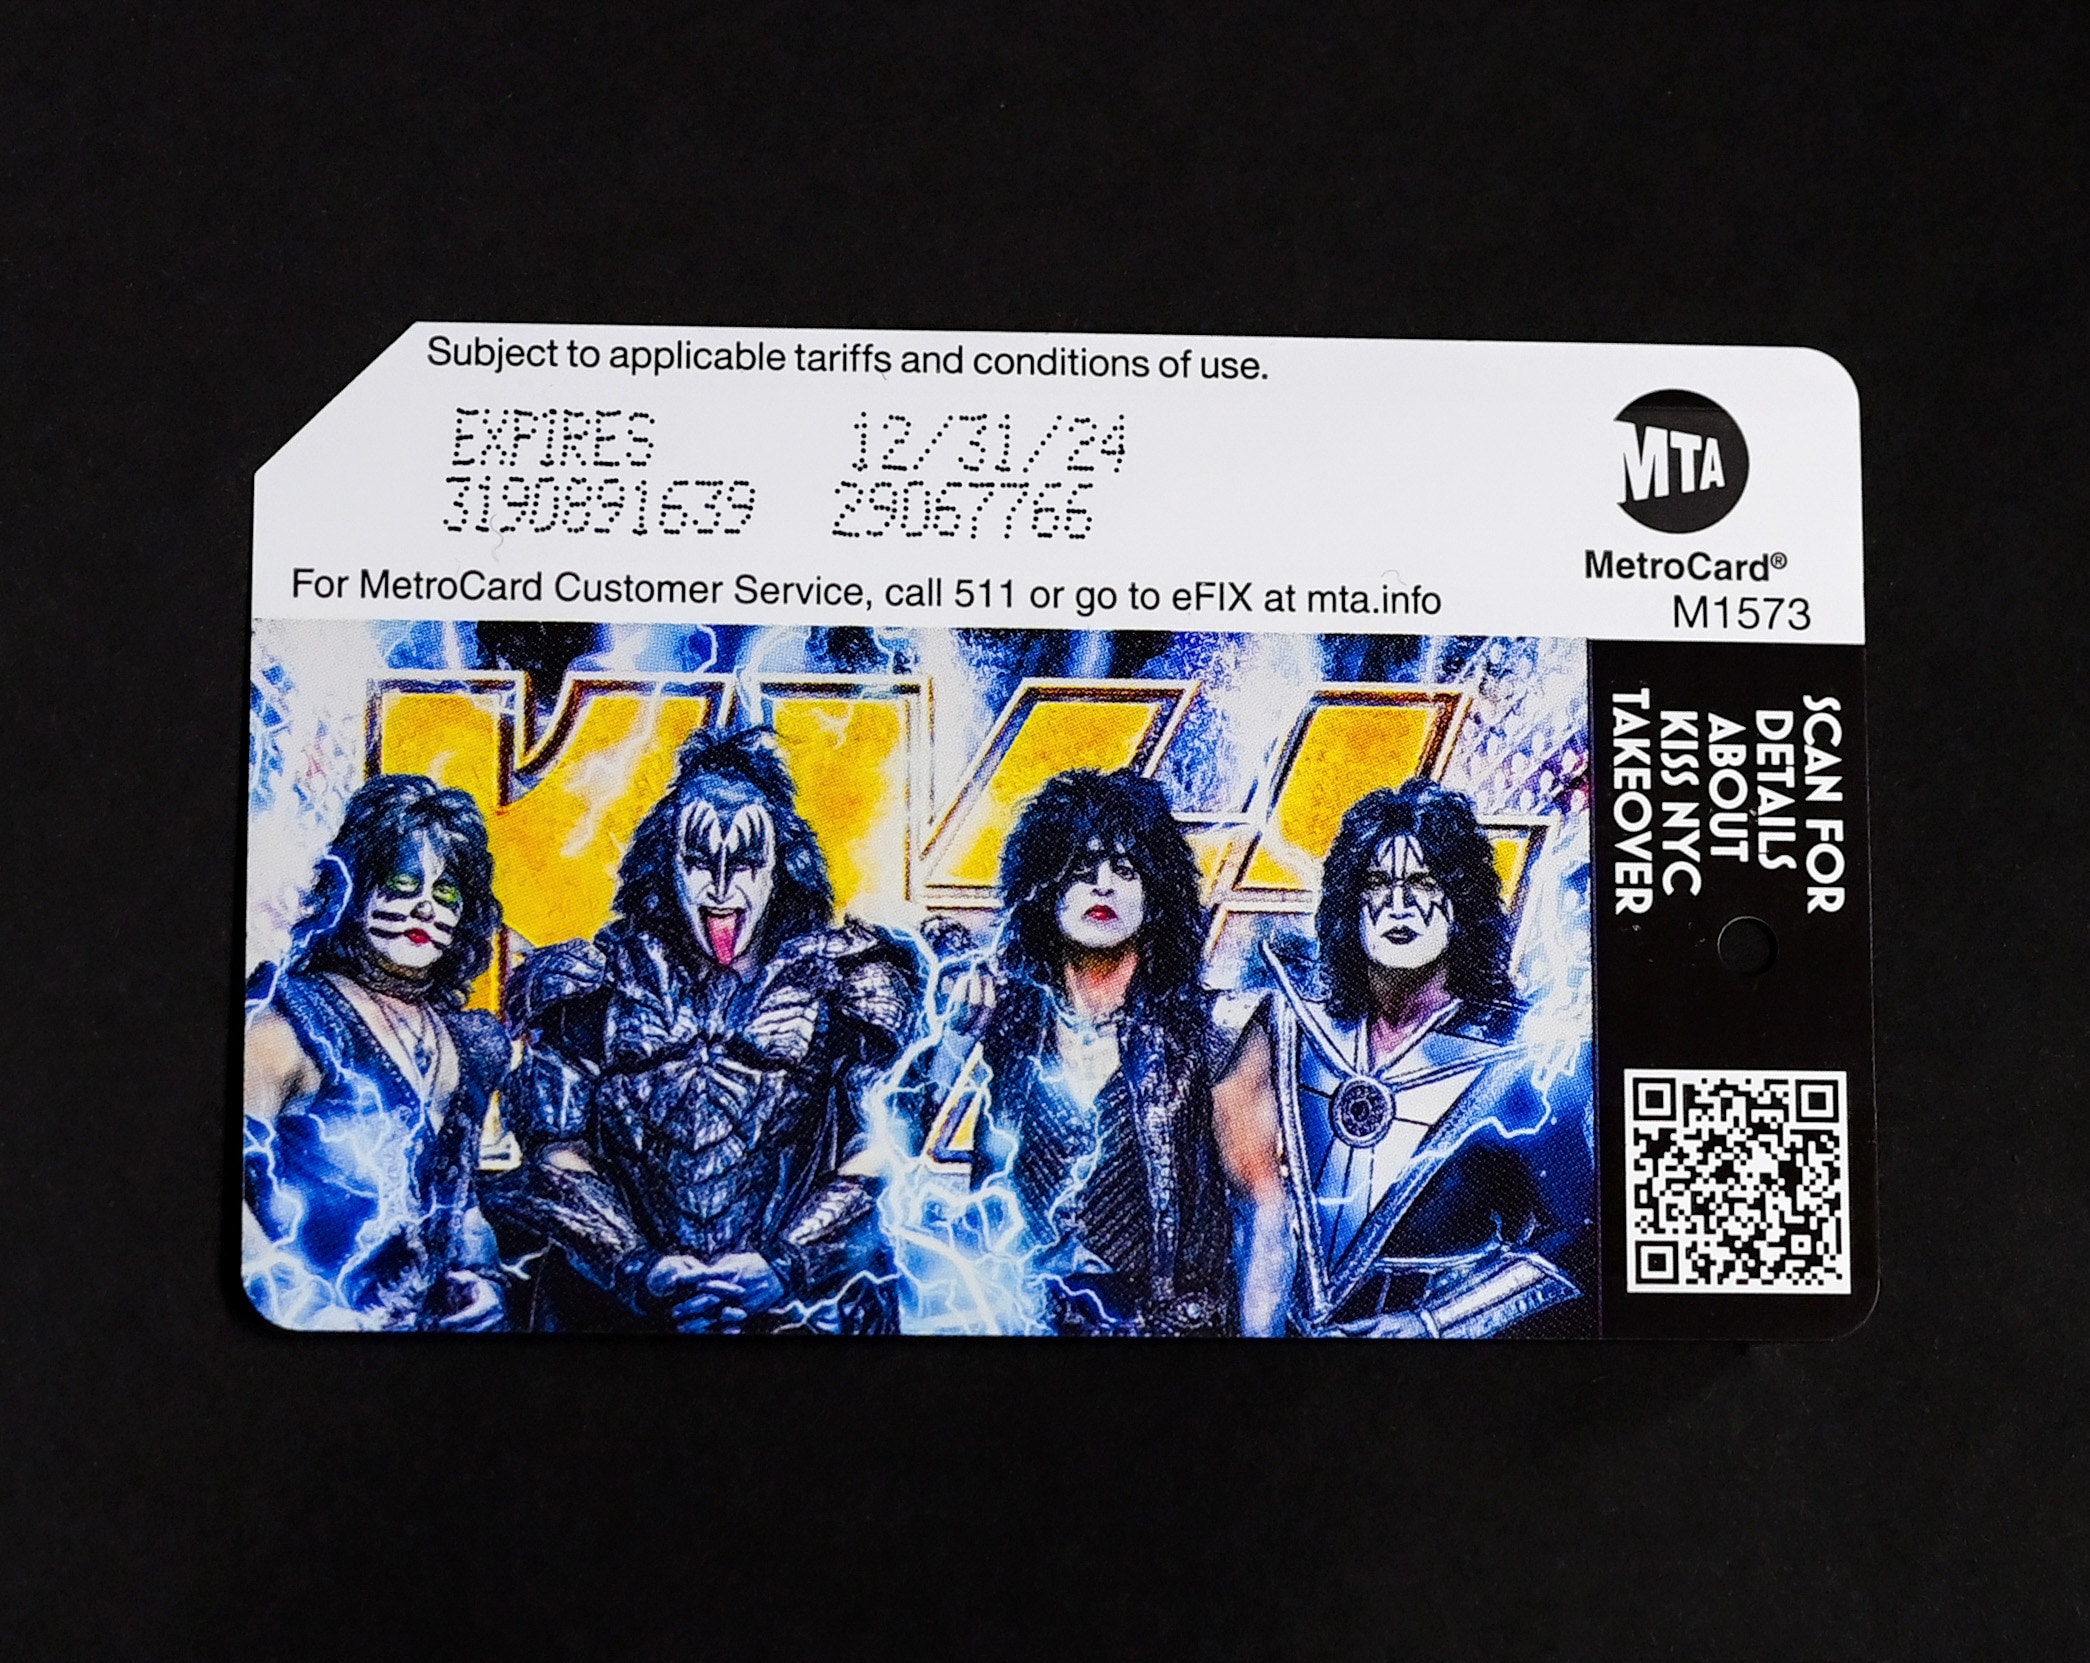 PHOTOS: MTA to Commemorate Final Madison Square Garden Concert of Legendary Rock Band KISS with MetroCards on November 27 